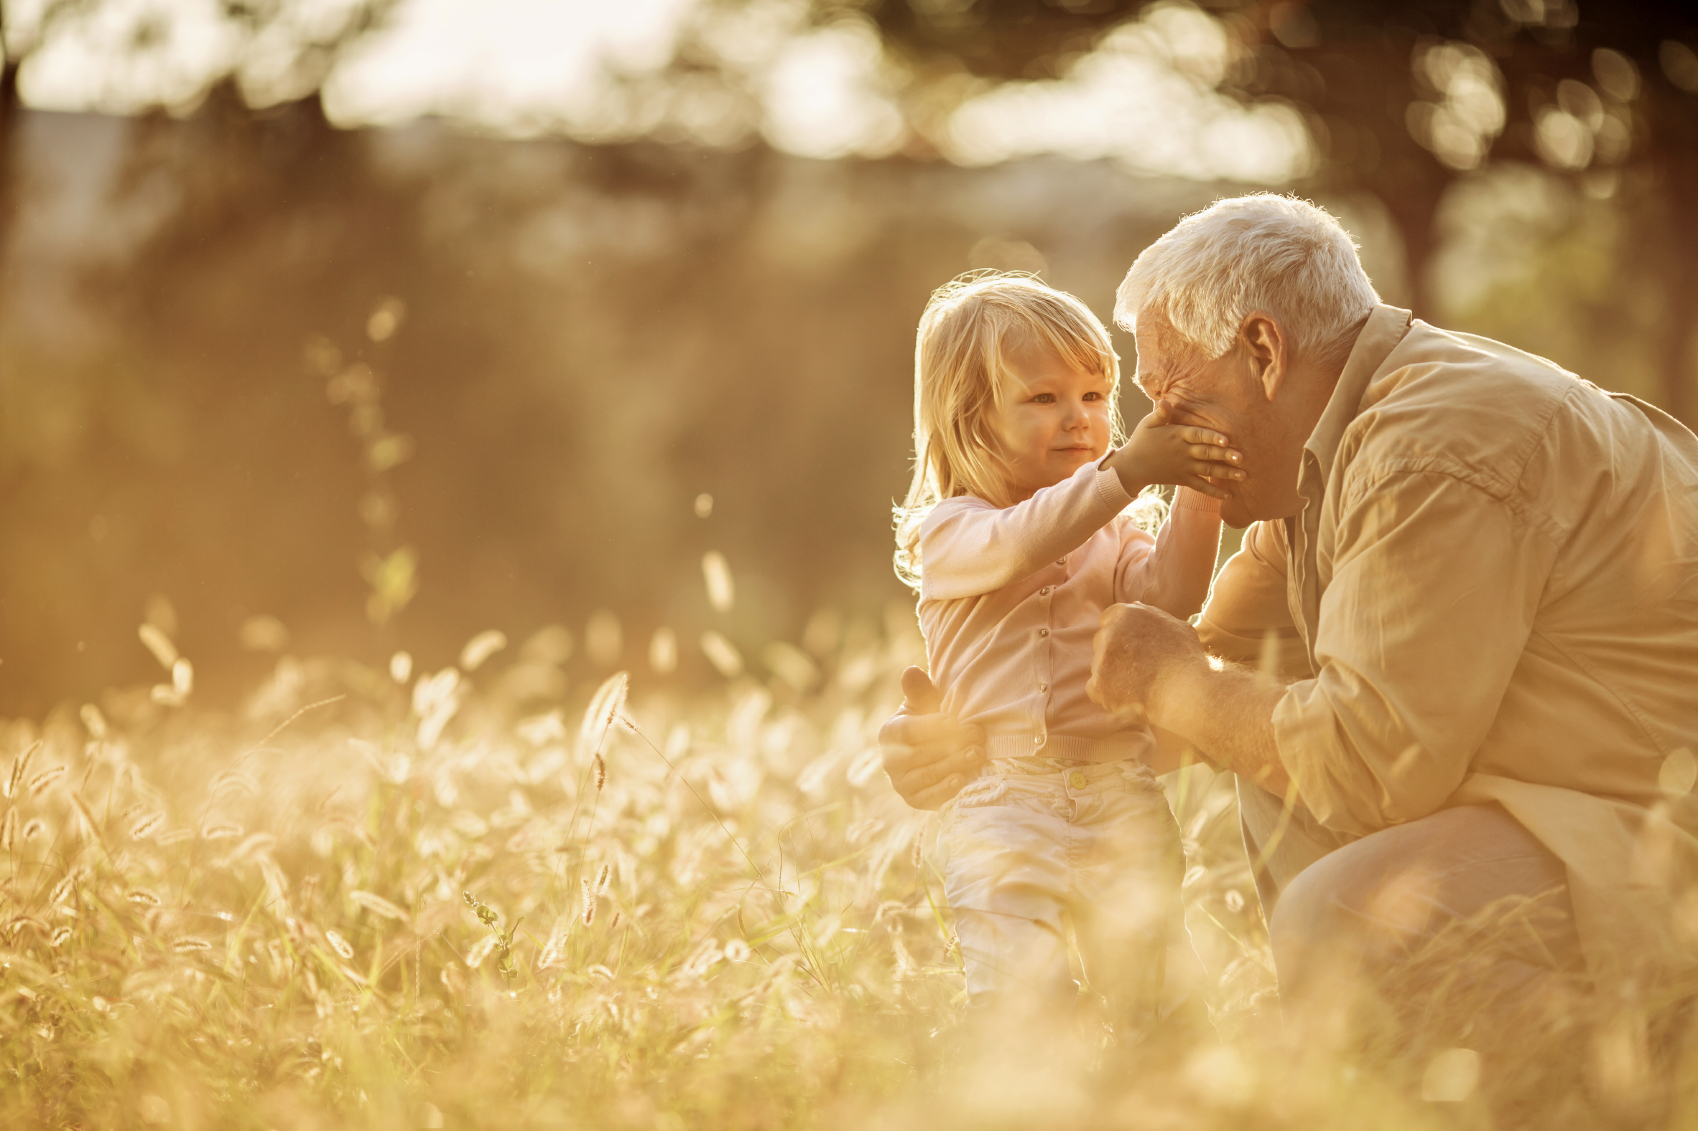 Young girl gently touching her grandfather's face in a meadow